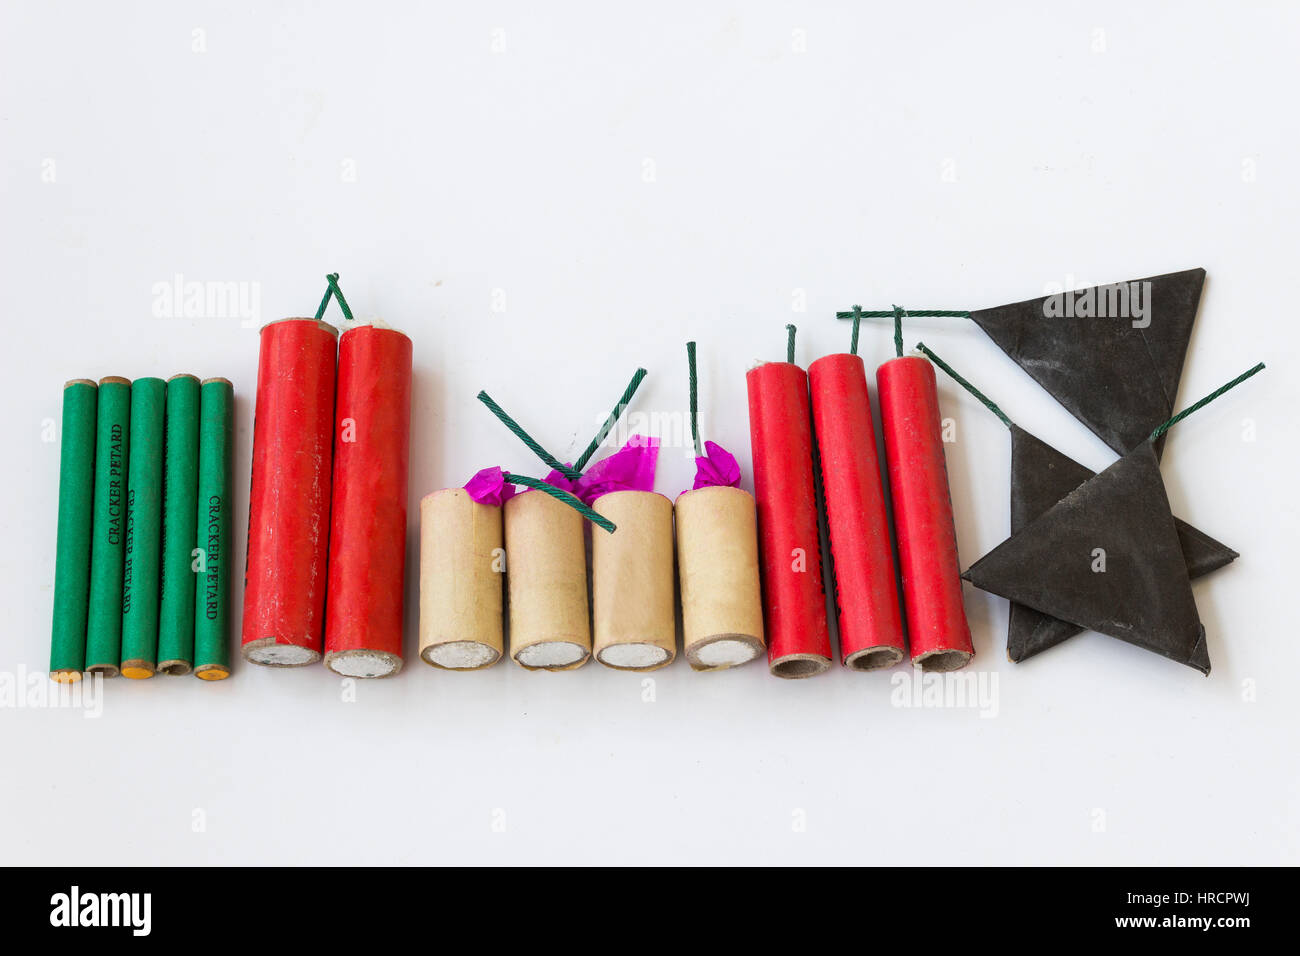 Firecrackers of different types and shapes on a white background Stock Photo